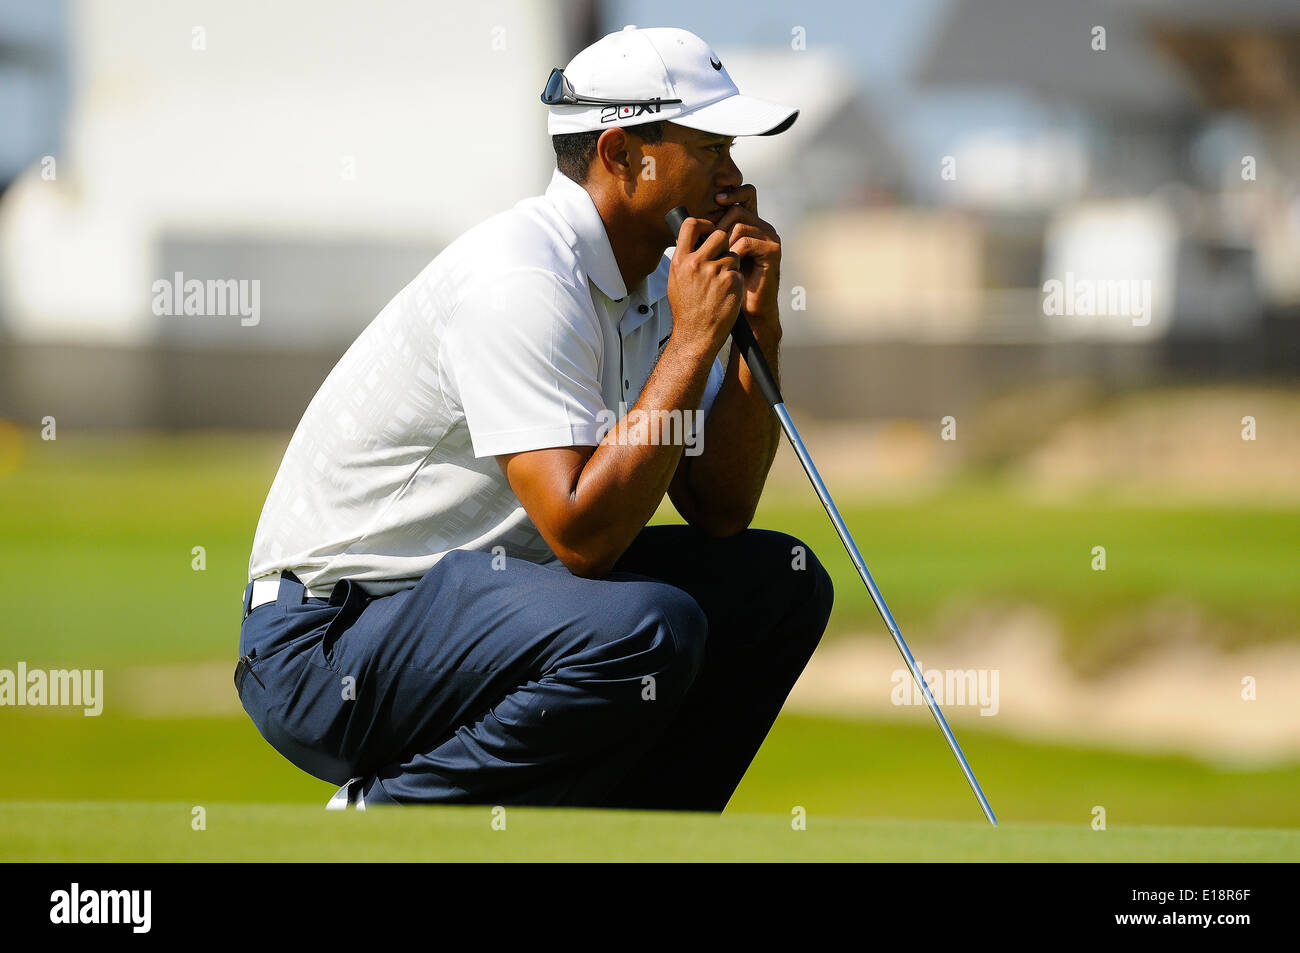 Sydney - November 11, 2011. Tiger Woods examines his putt in the second round in the Australian Open at The Lakes golf course. Stock Photo